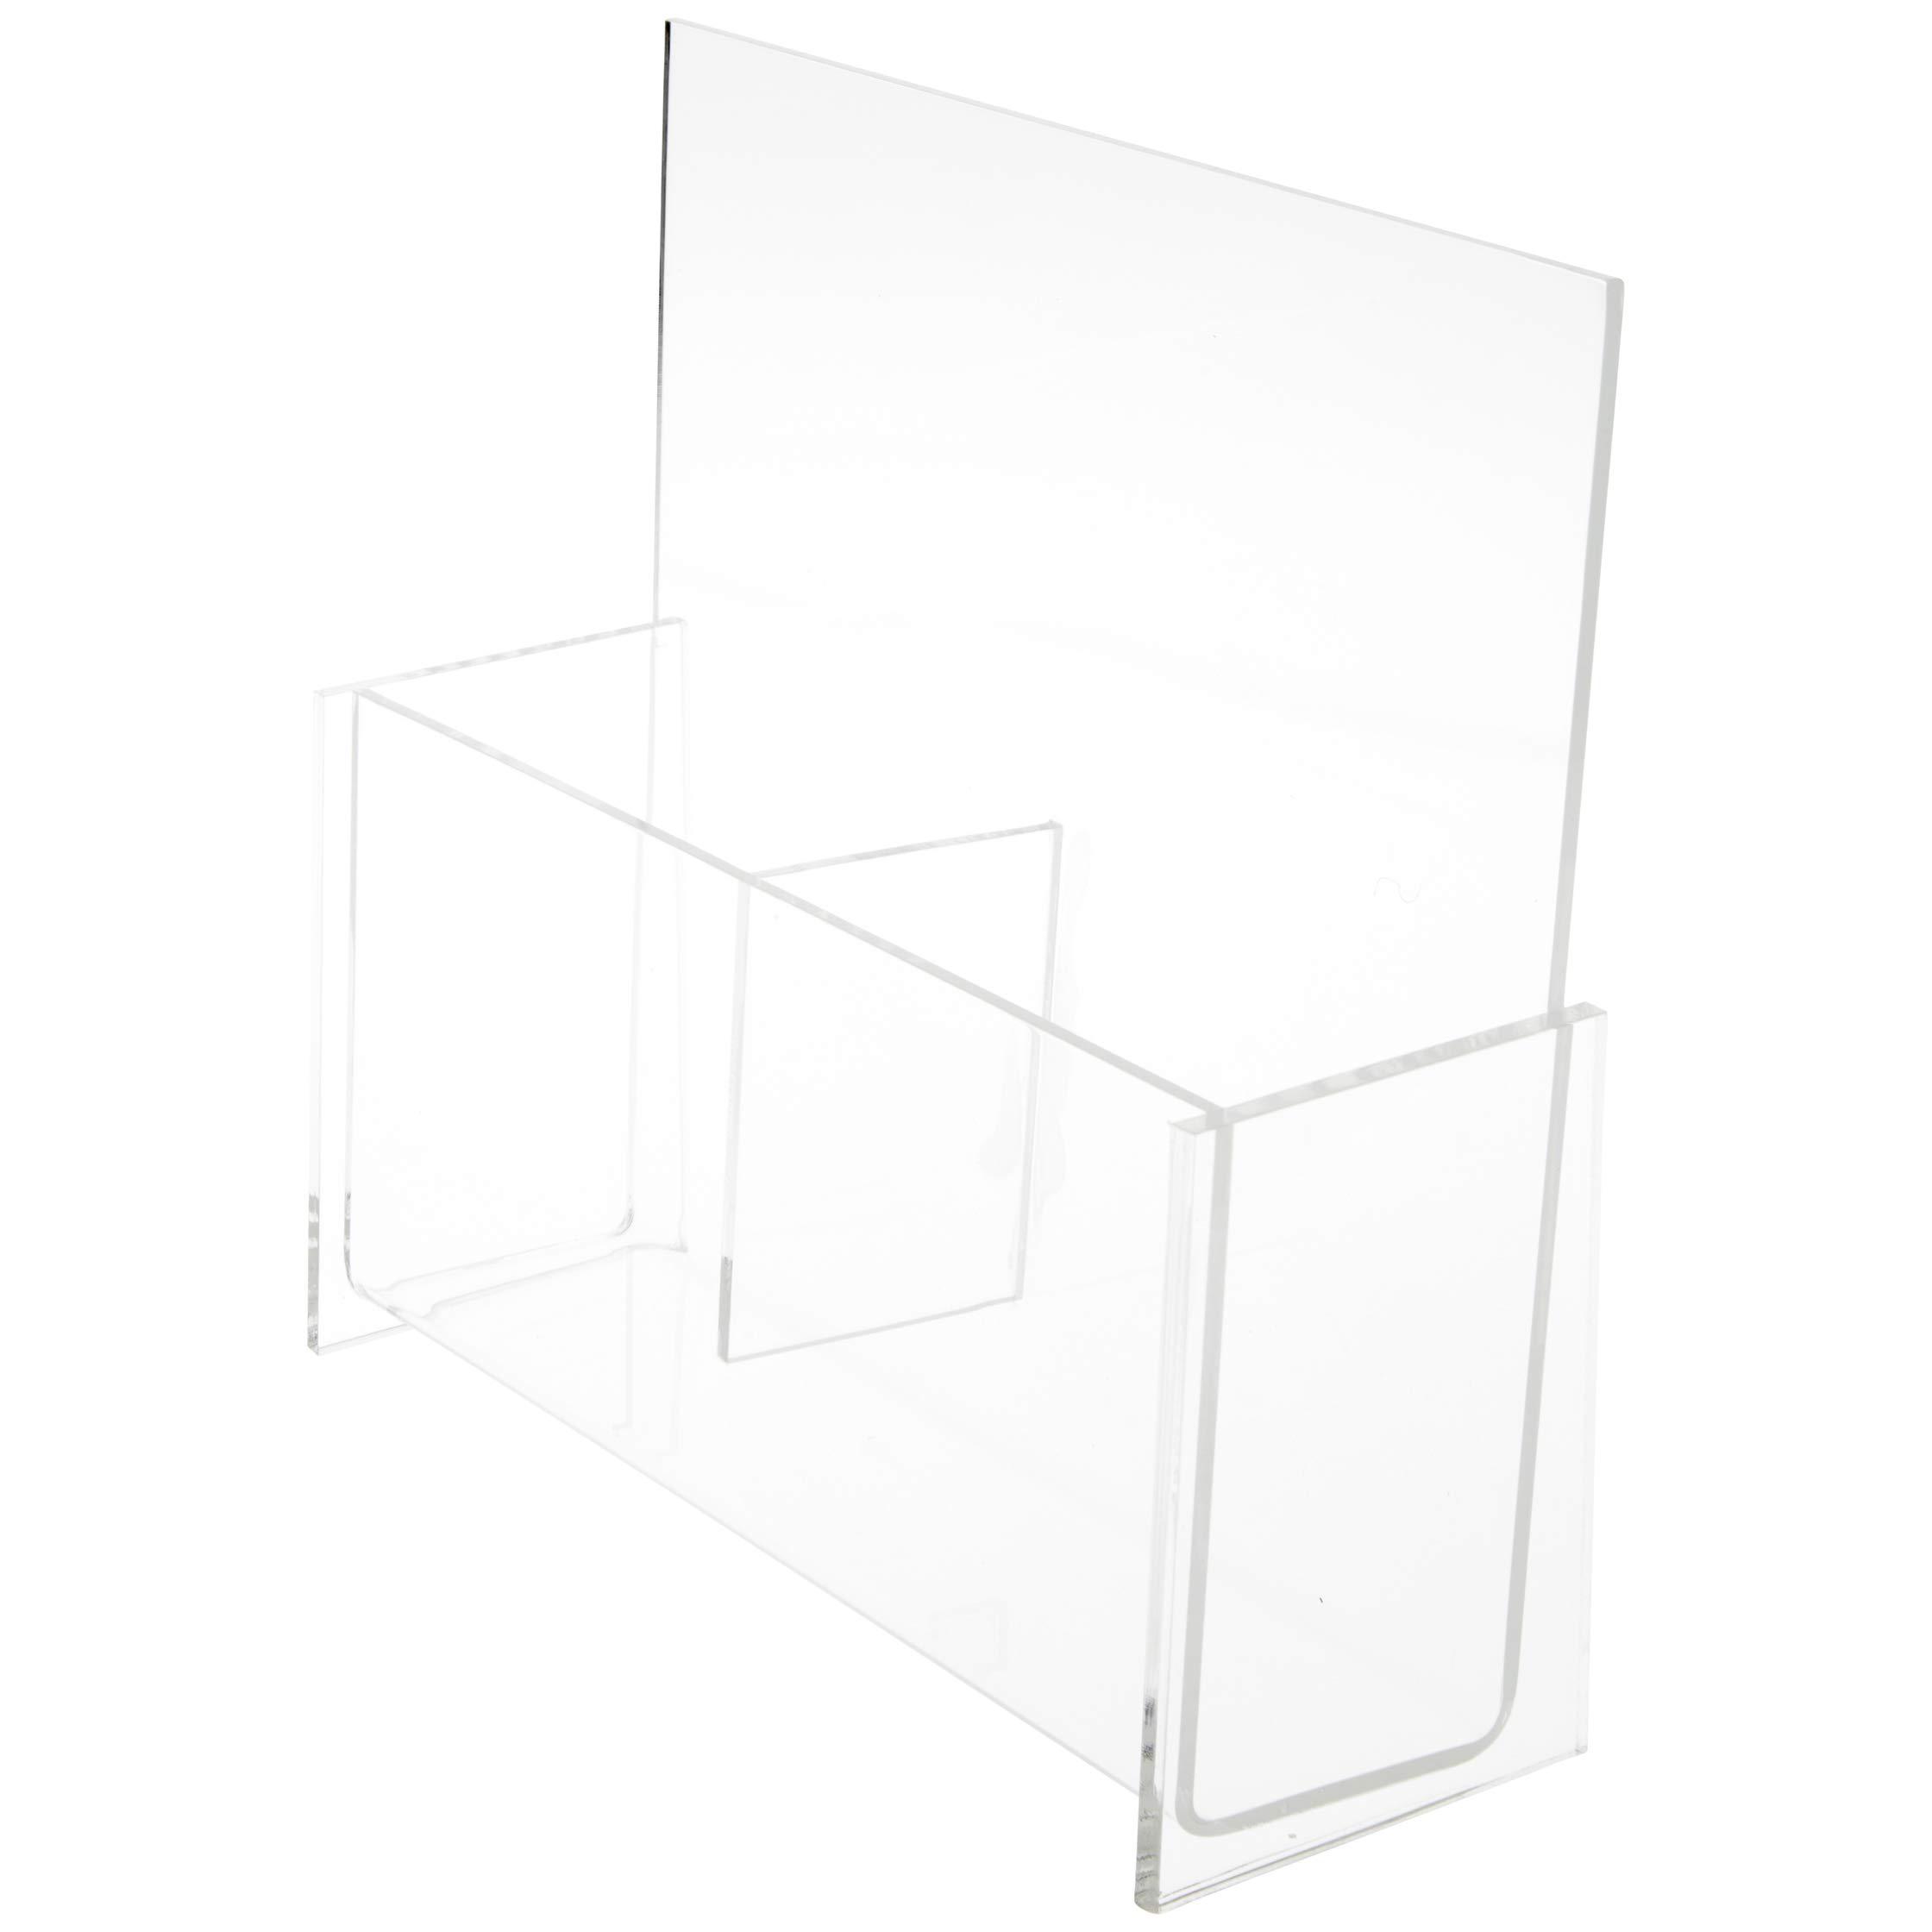 plymor clear acrylic 2-pocket tri-fold paper/brochure literature holder (for countertop), fits 4" wide items